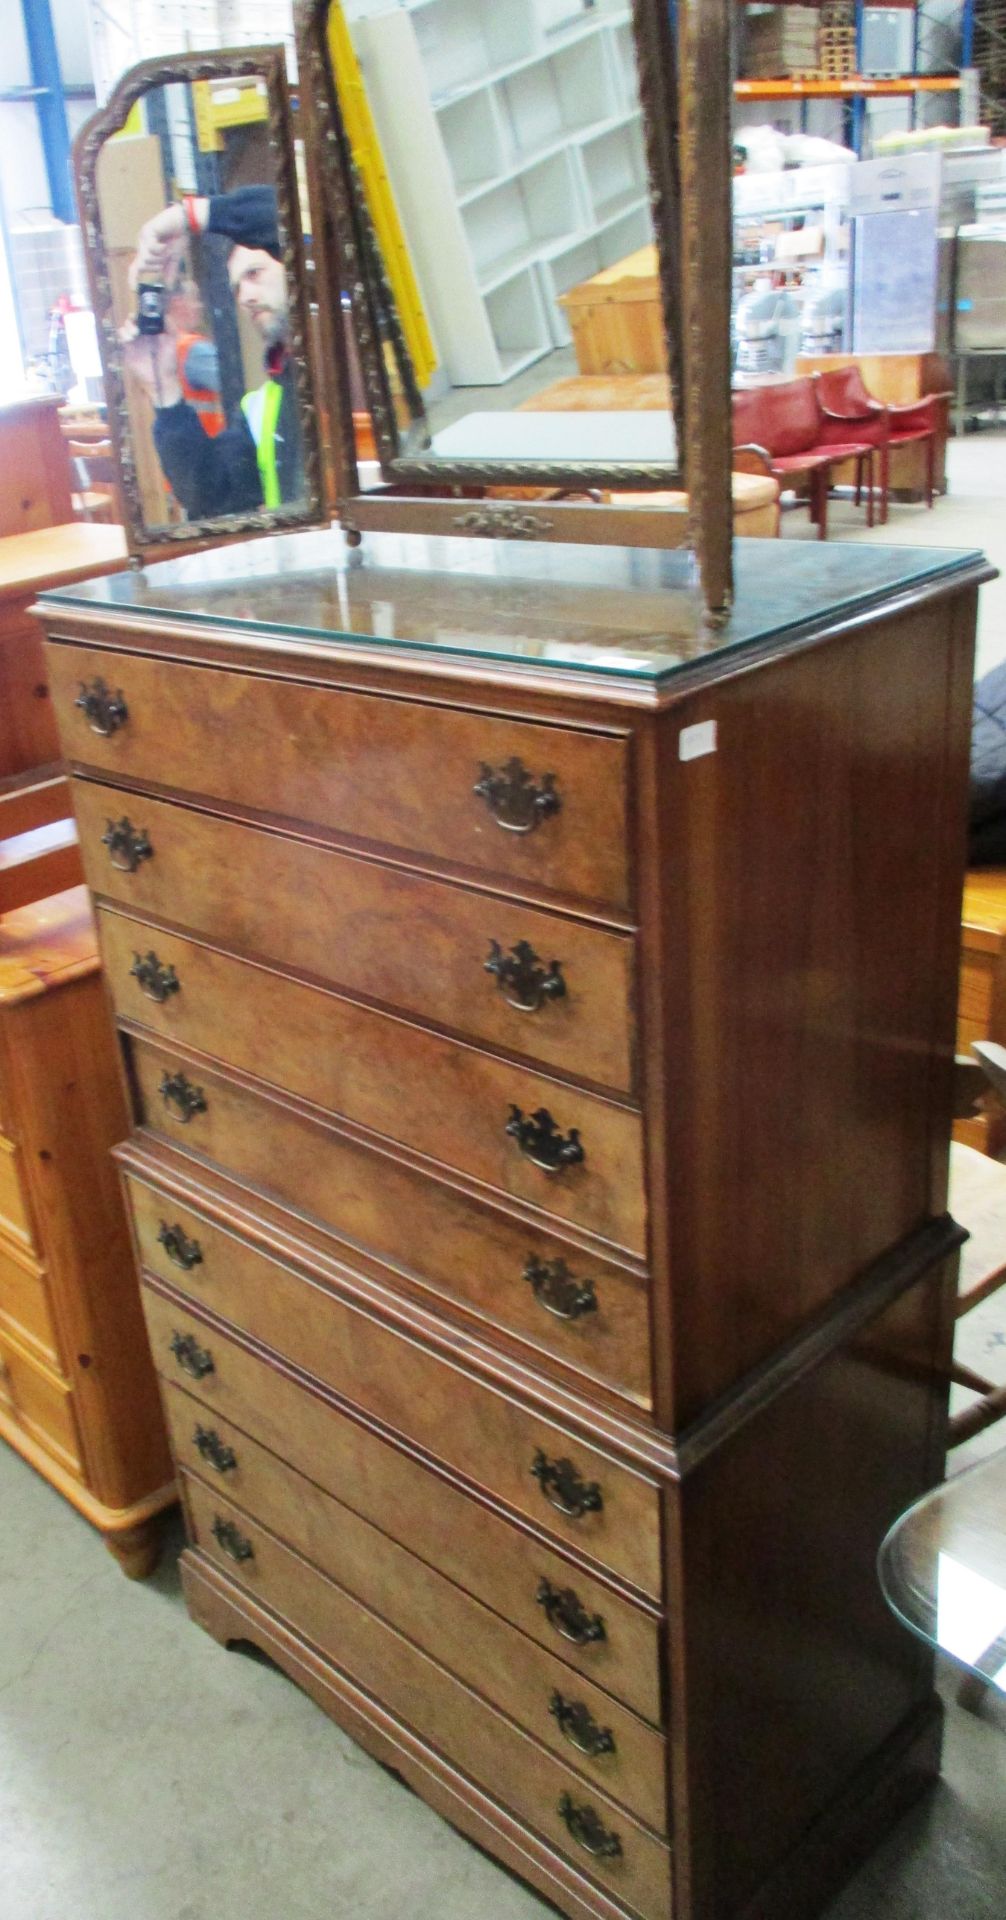 A walnut 8 drawer tall boy 78 x 135cm high complete with a non-matching gilt framed dressing table